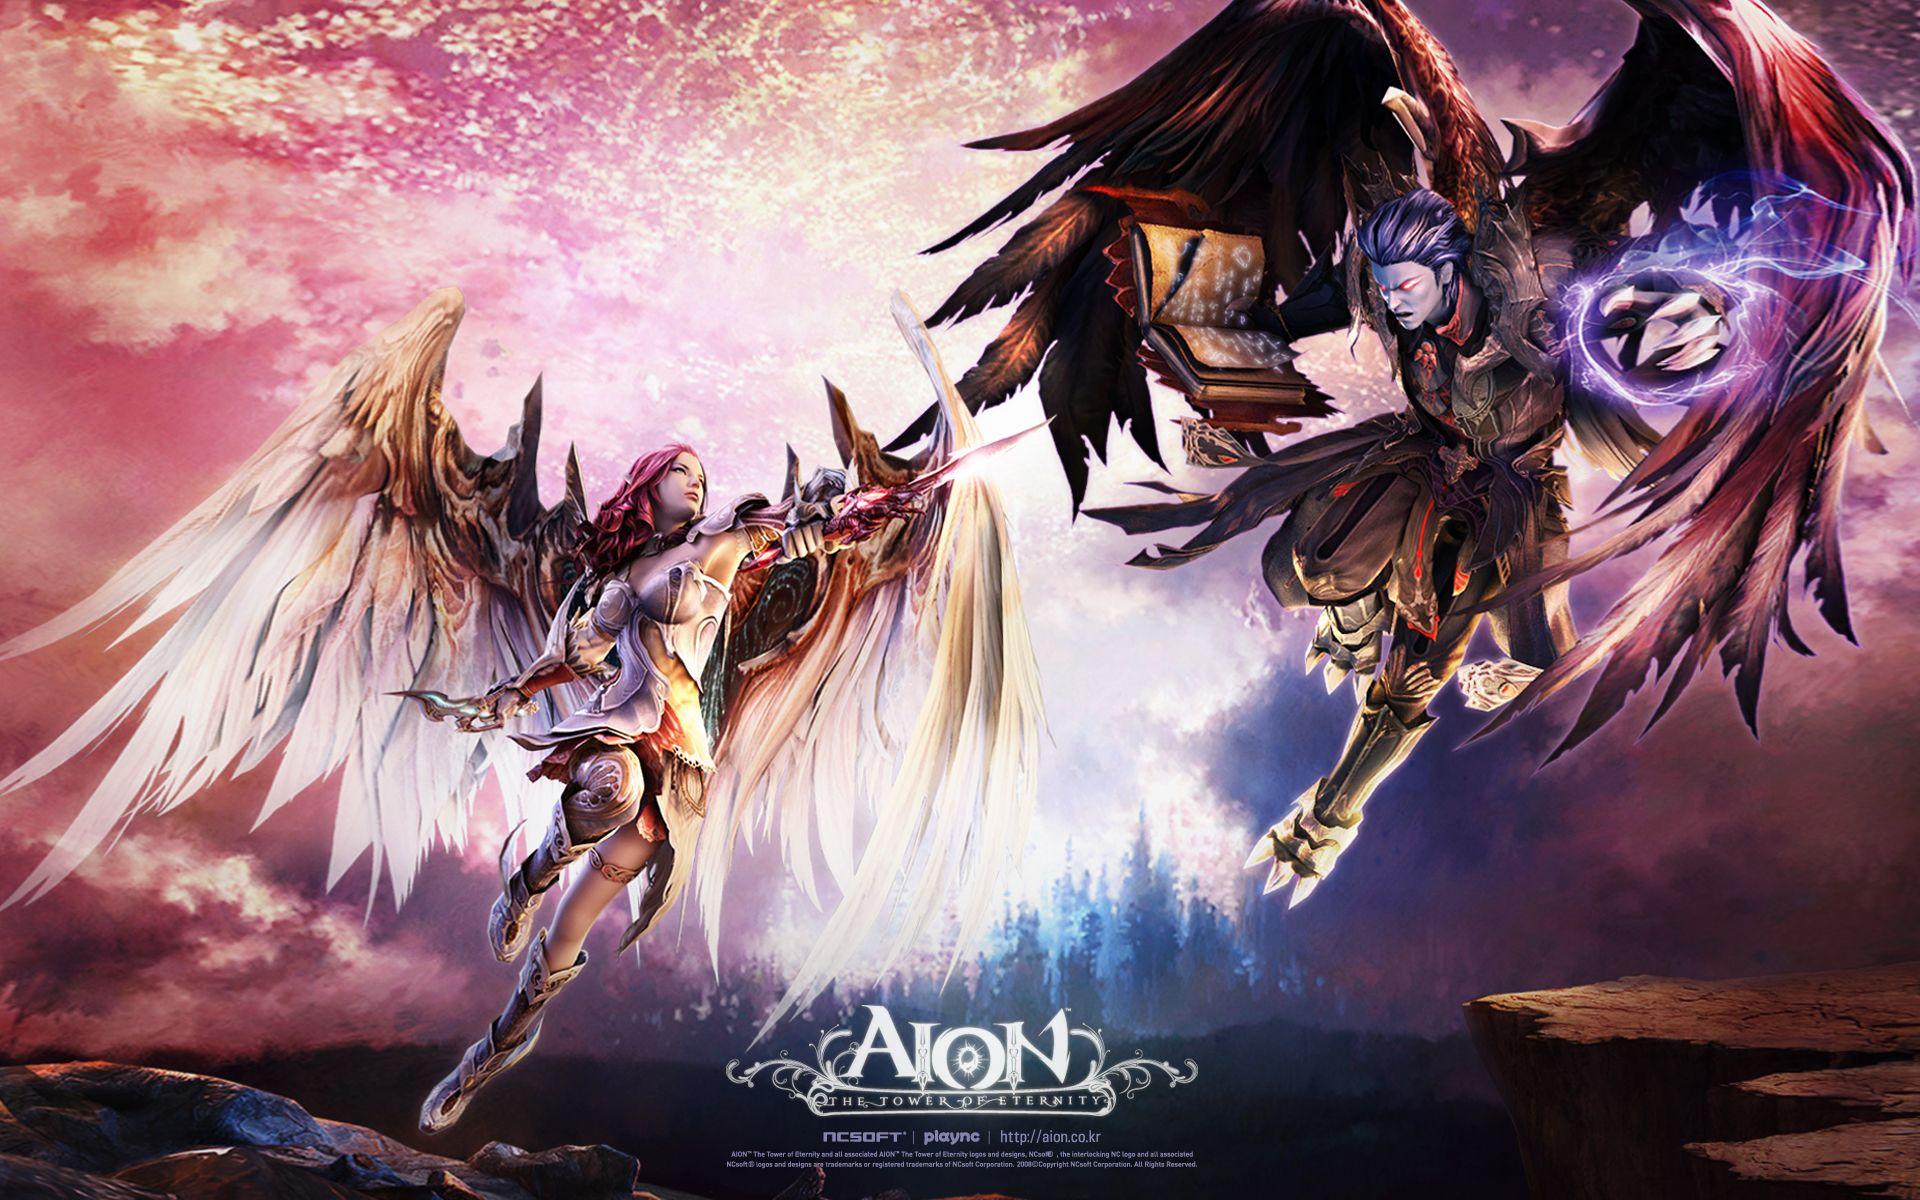 Wallpaper, animated, aion, massively, media, guild, mmorpg, game